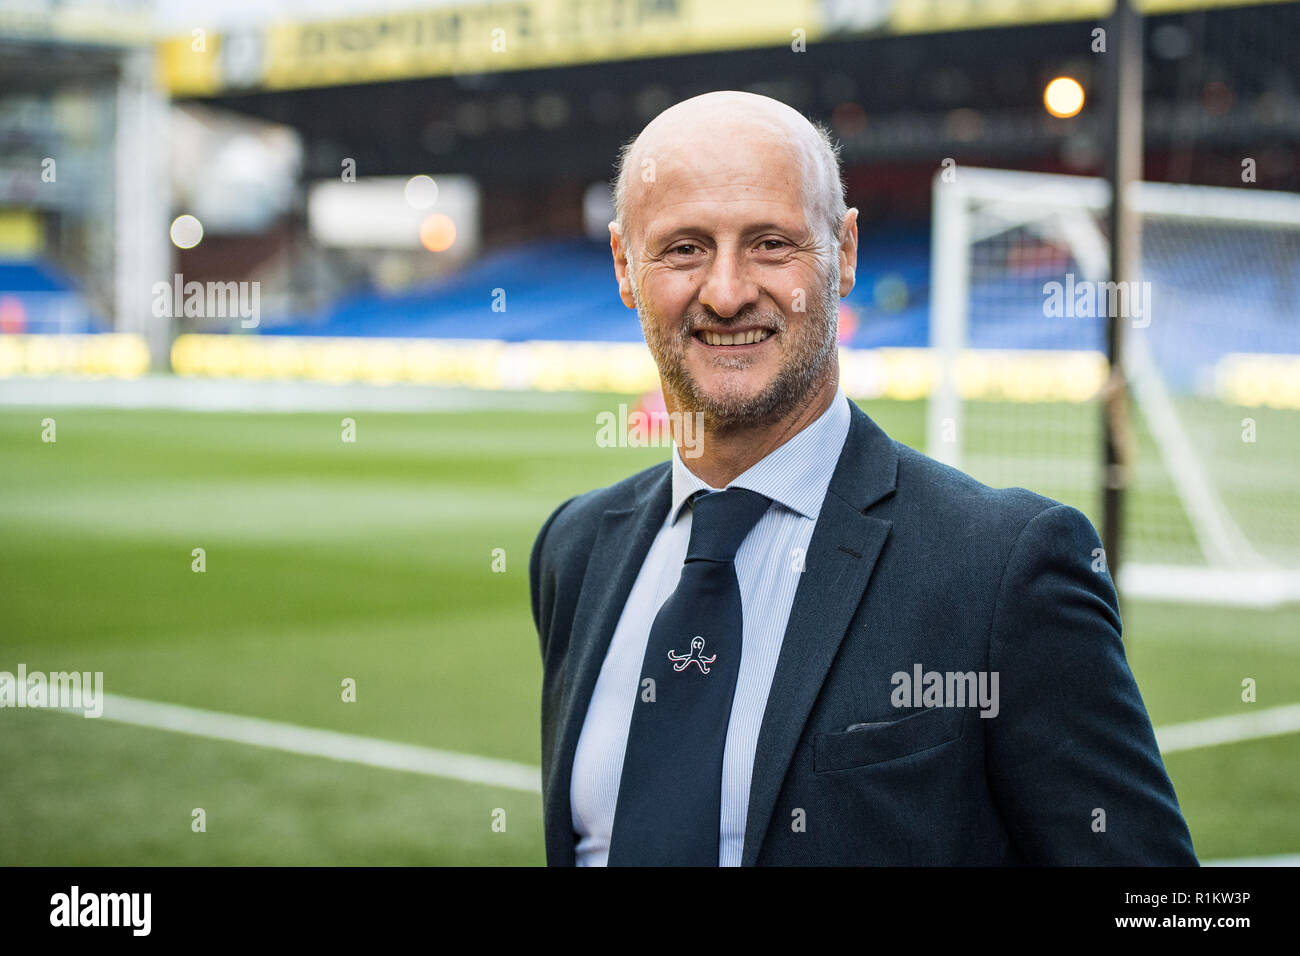 LONDON, ENGLAND - NOVEMBER 10: Attilio Lombardo ex-player of Crystal Palace arrived for the Premier League match between Crystal Palace and Tottenham Hotspur at Selhurst Park on November 10, 2018 in London, United Kingdom. (MB Media) Stock Photo